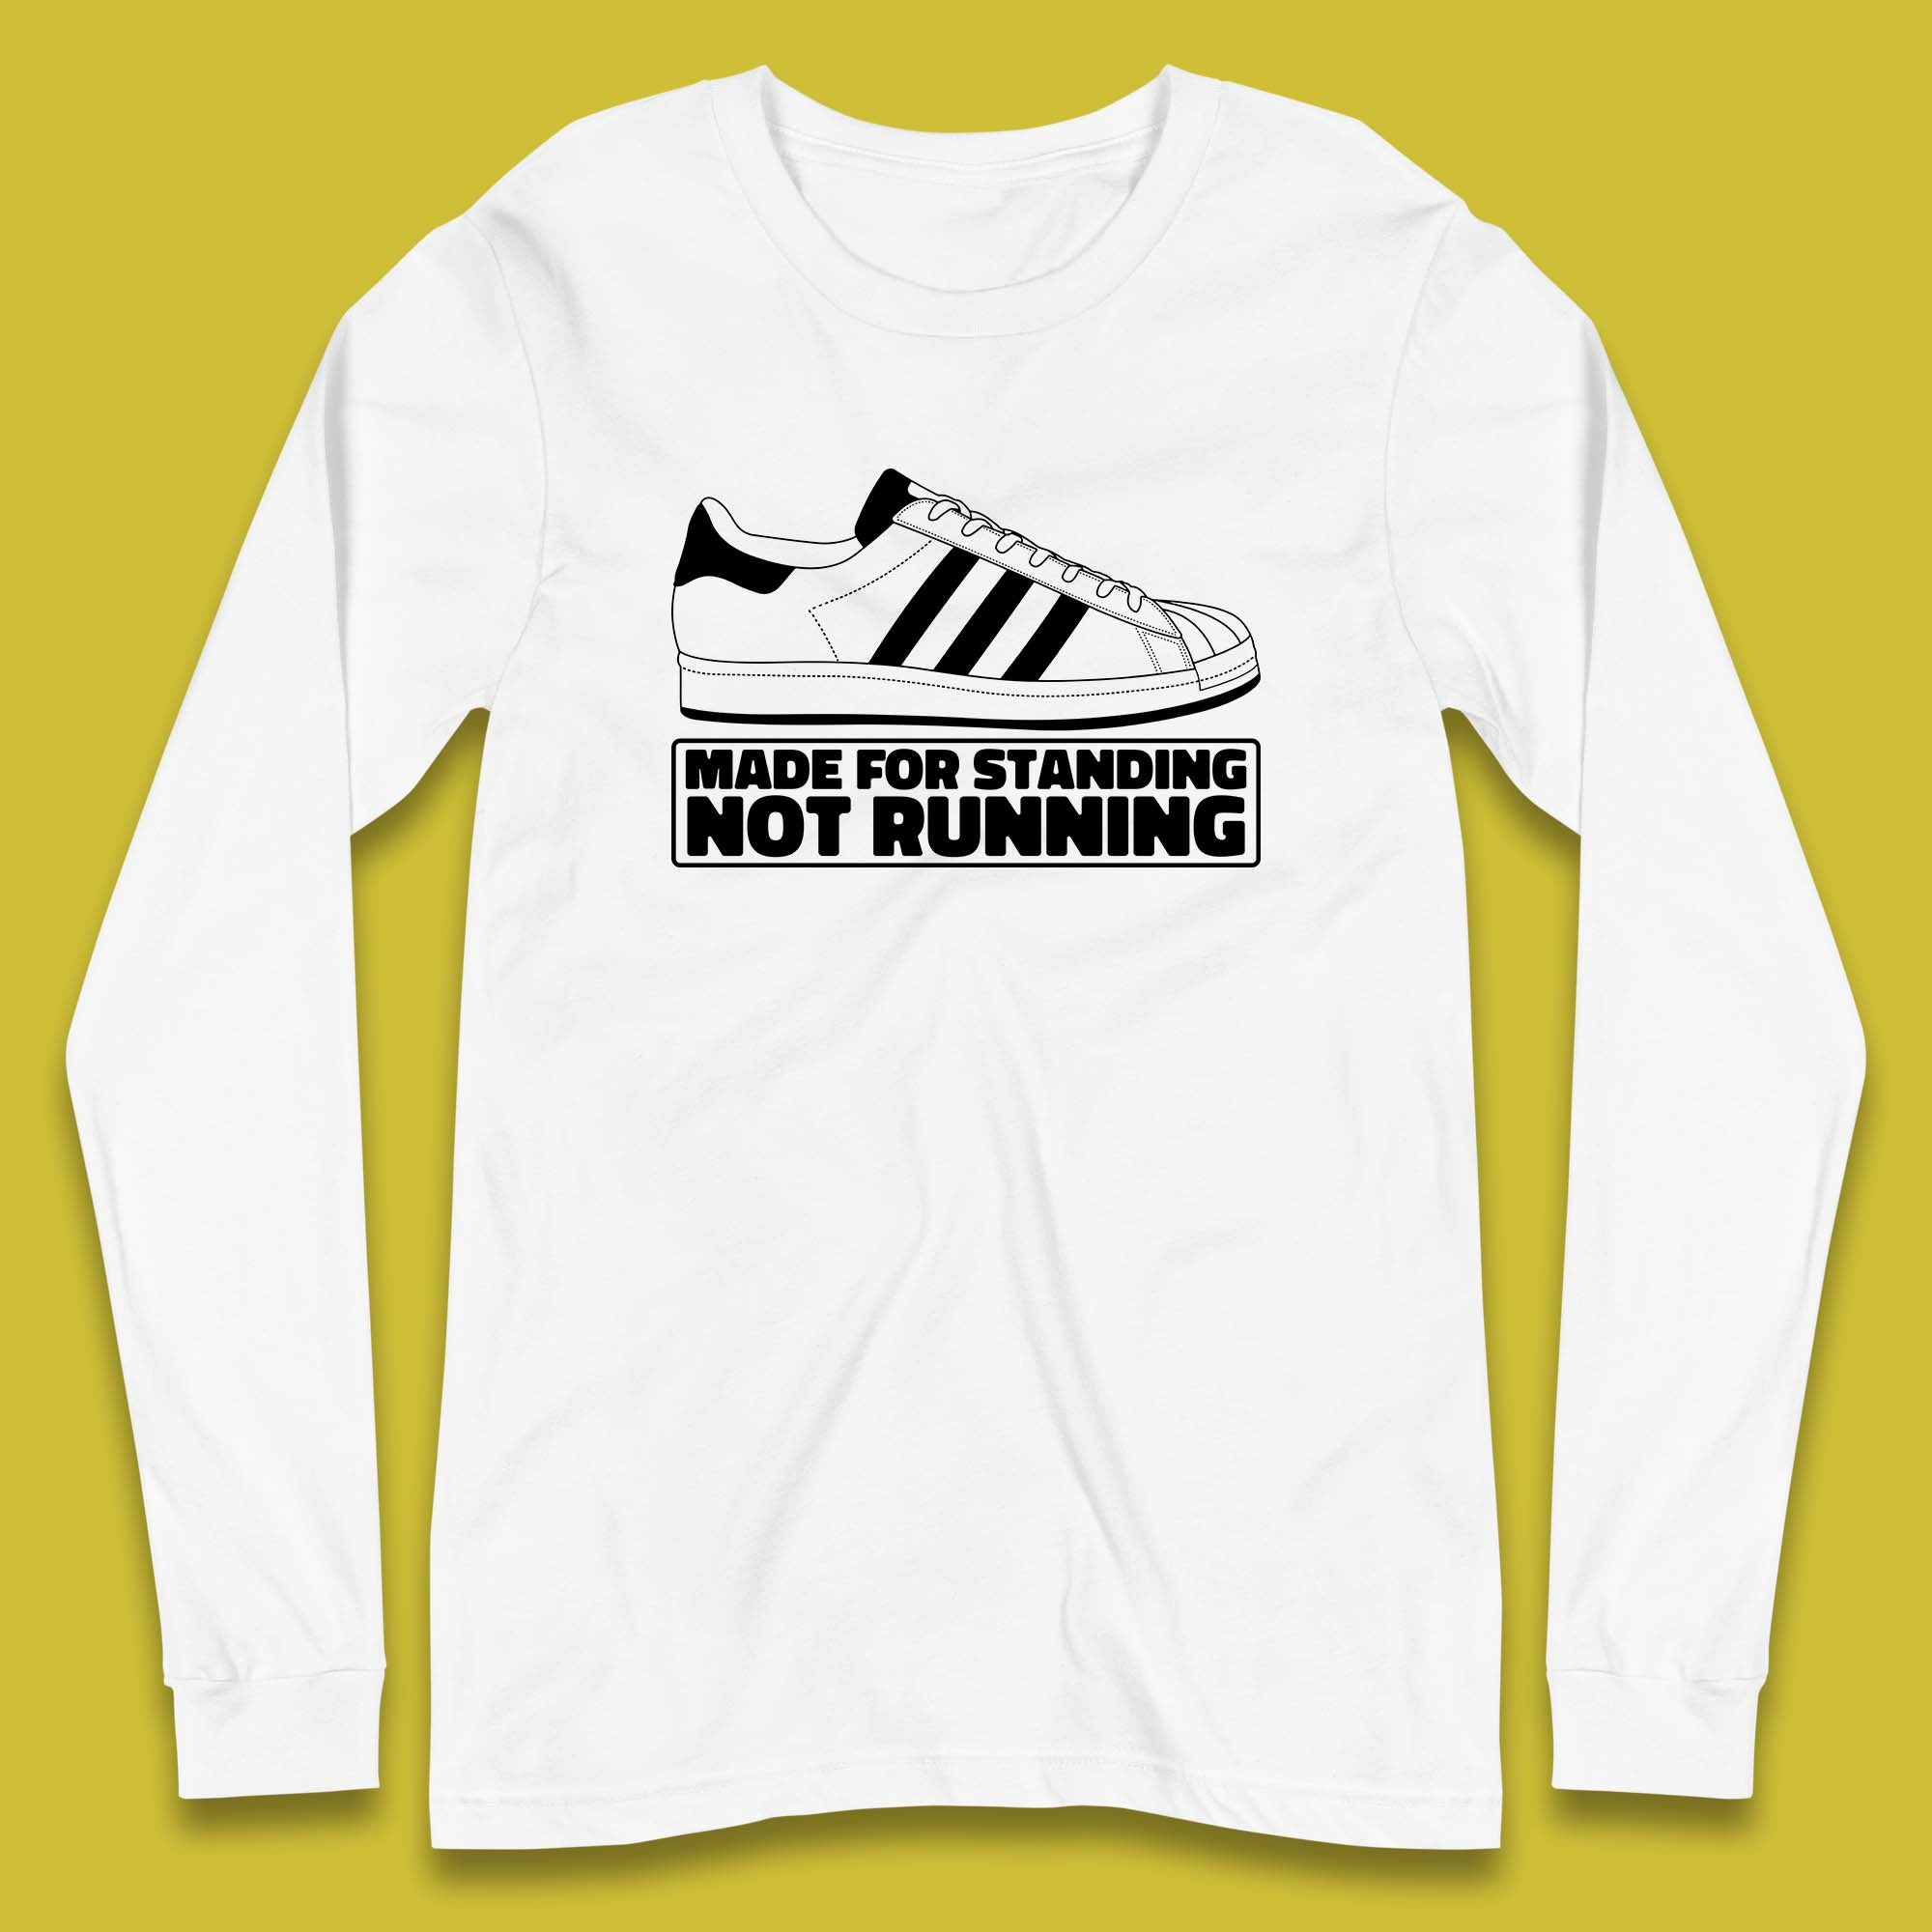 Made For Standing Not Running Football Hooligan Trimm Trab Terraces Long Sleeve T Shirt